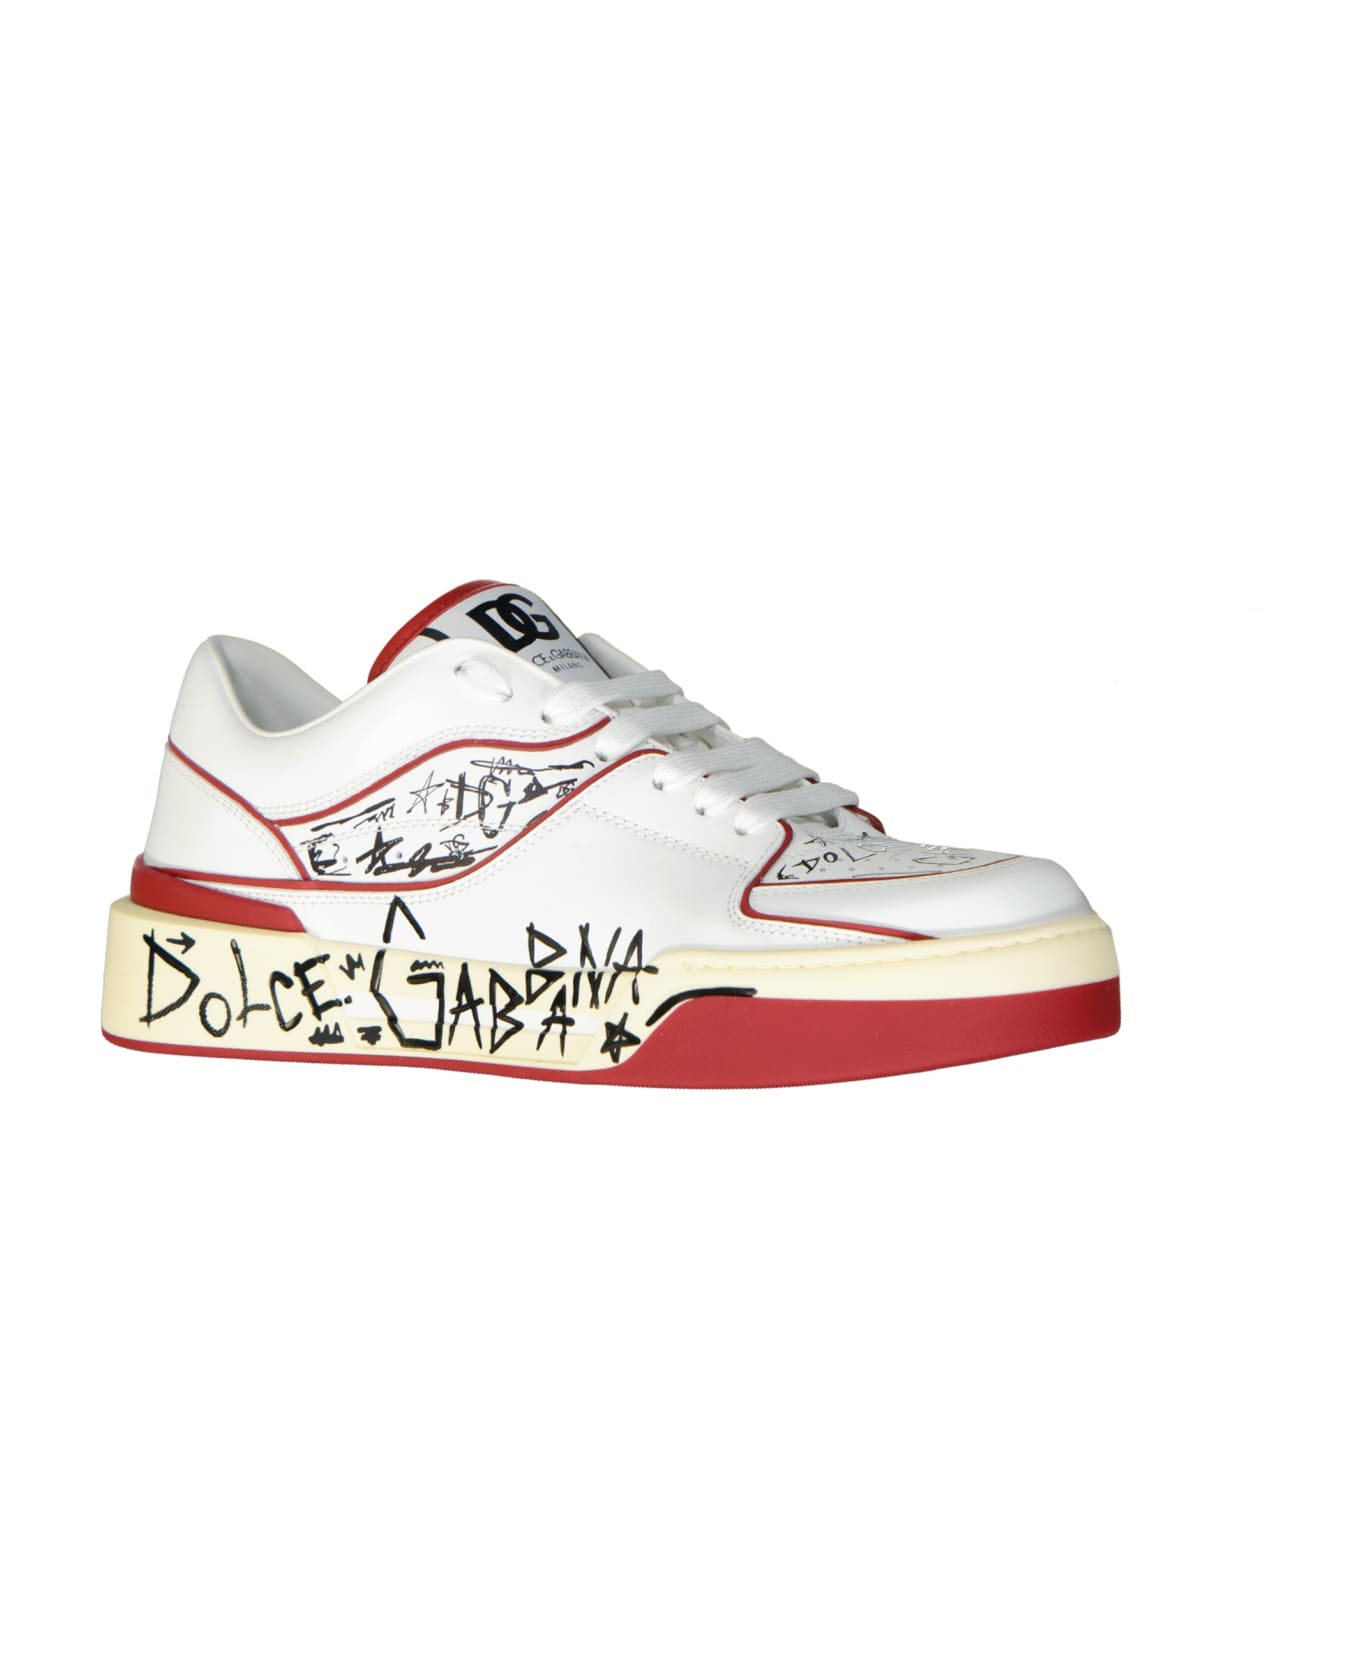 Dolce & Gabbana Printed Leather Sneakers - White